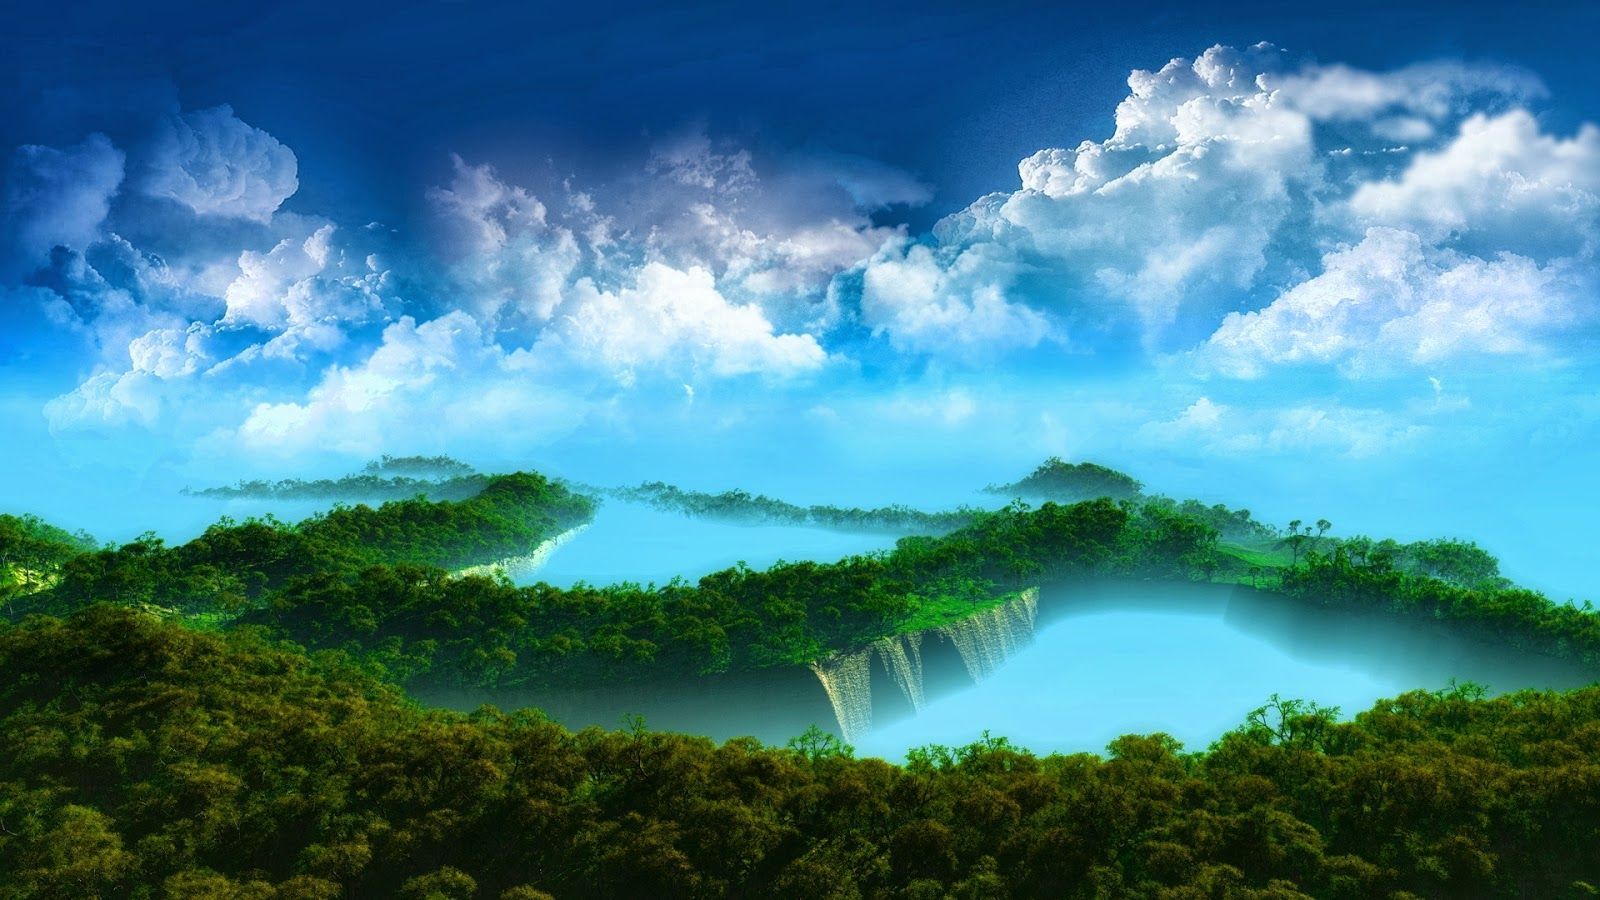 Wallpaper Of Nature Free Download - HD Wallpapers Pretty